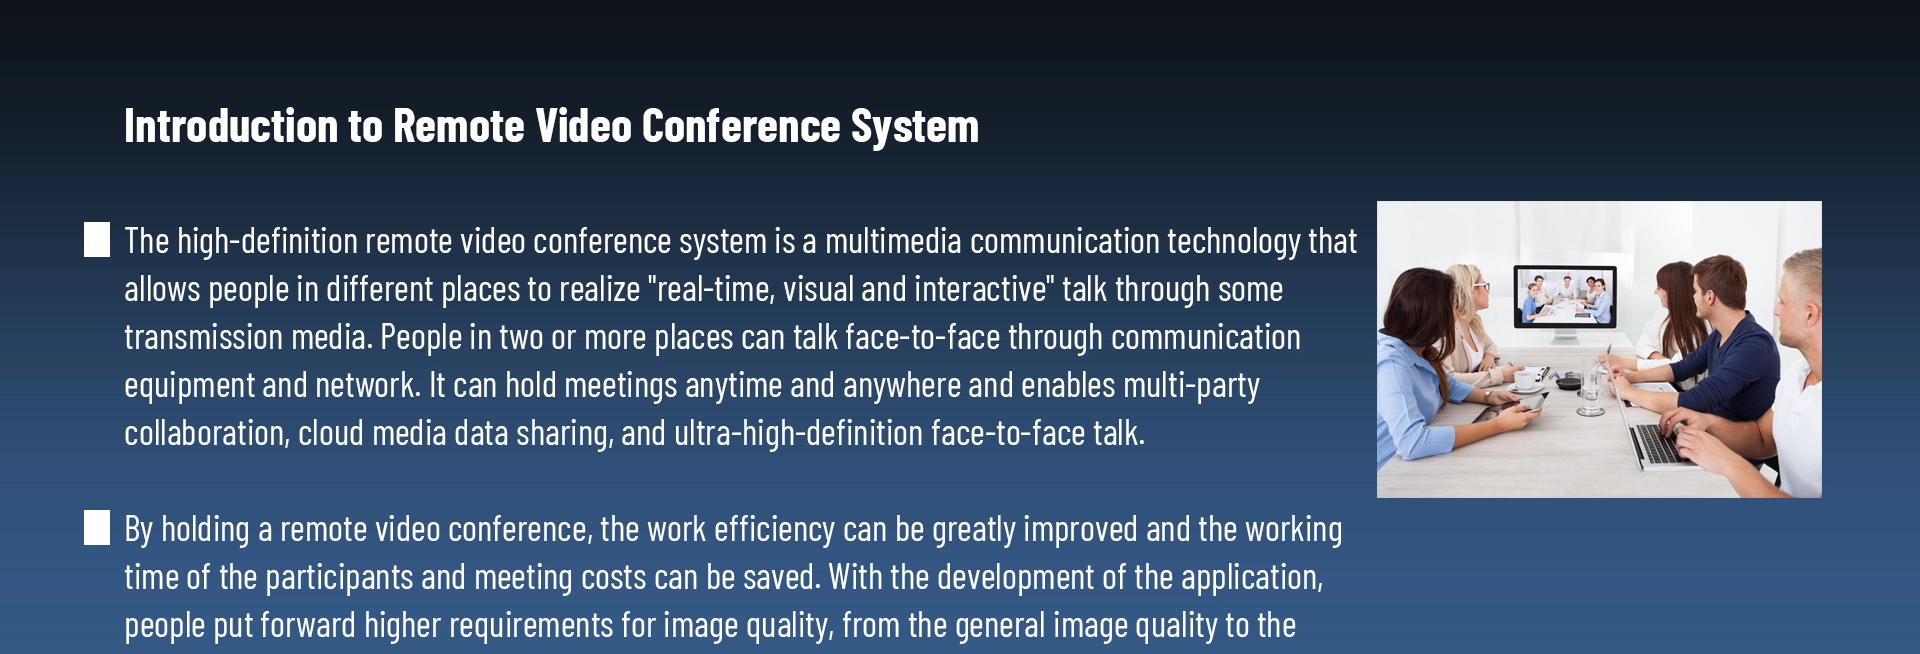 HD Video Conference MCU (40-128 channels)